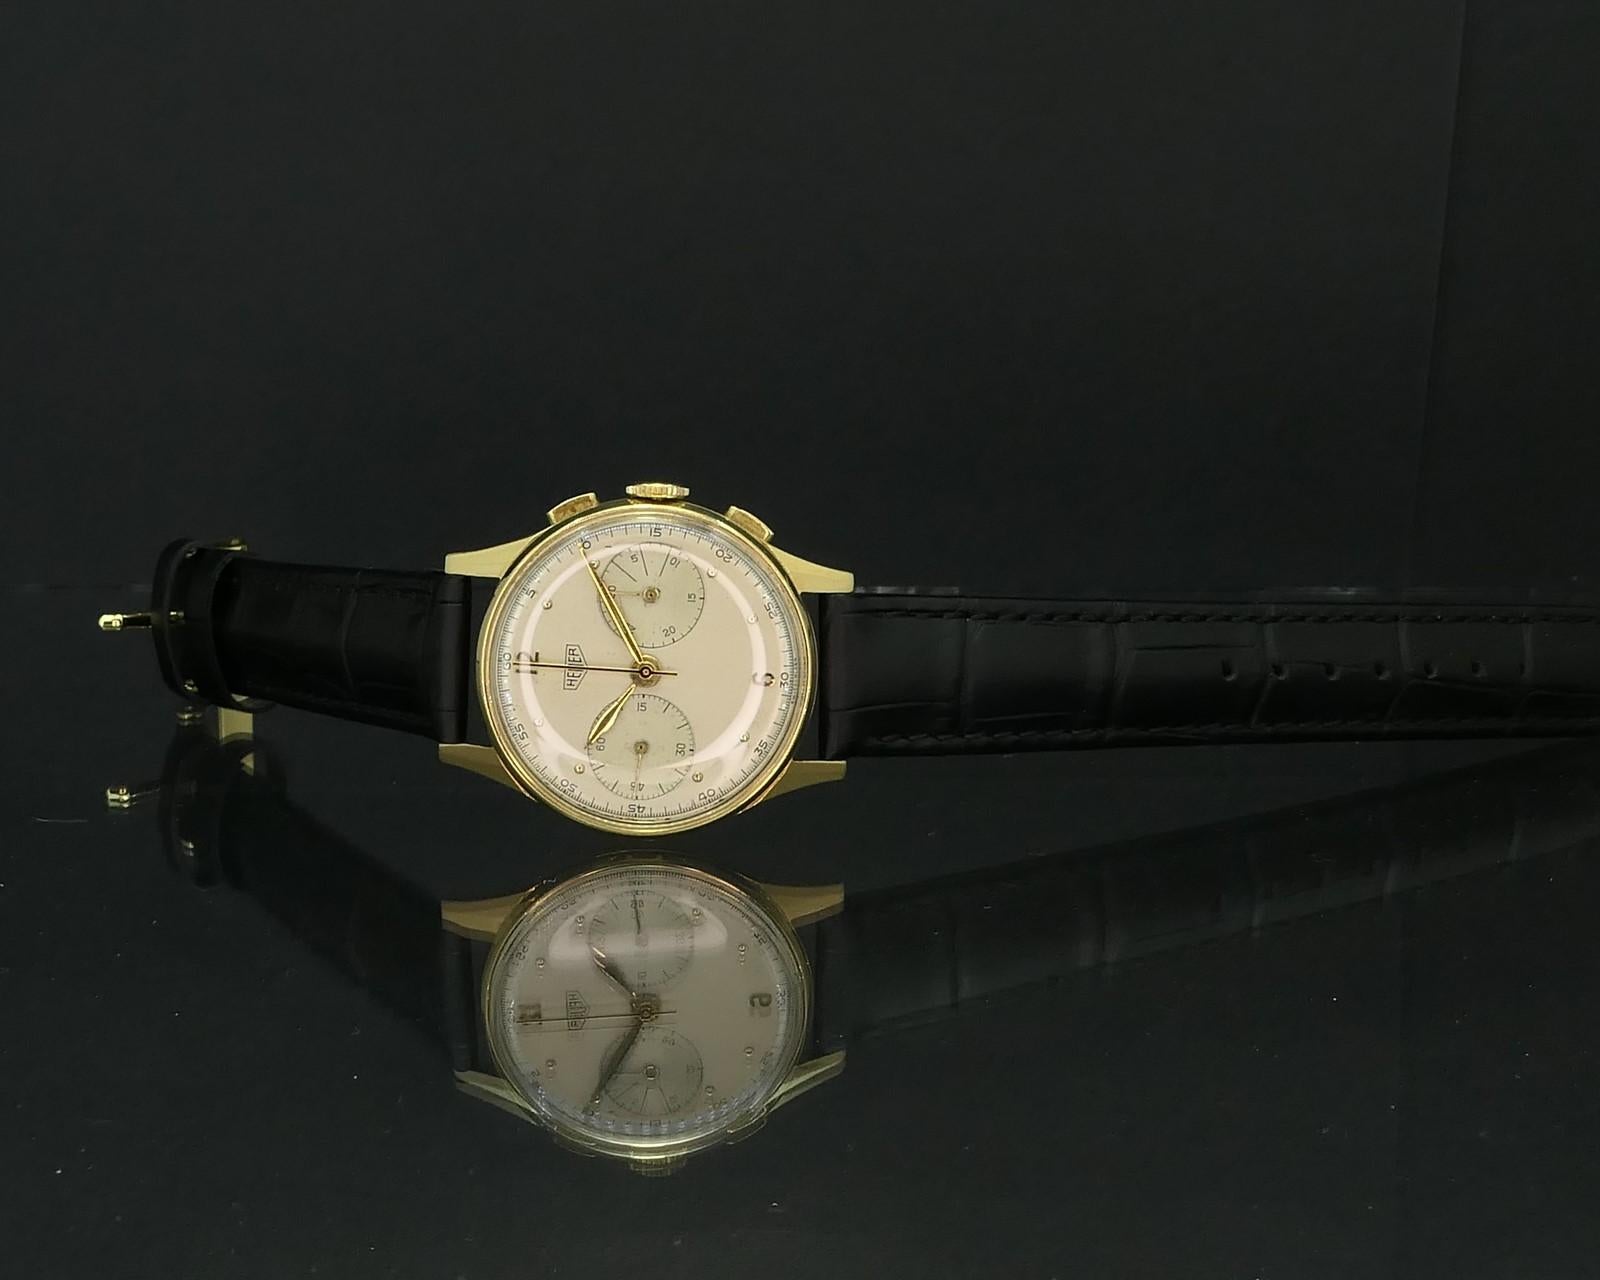 Vintage 18k Gold Heuer Big Eyes Chronograph 418 Valjoux 23 Mens Watch i15263 In Good Condition For Sale In Toledo, OH